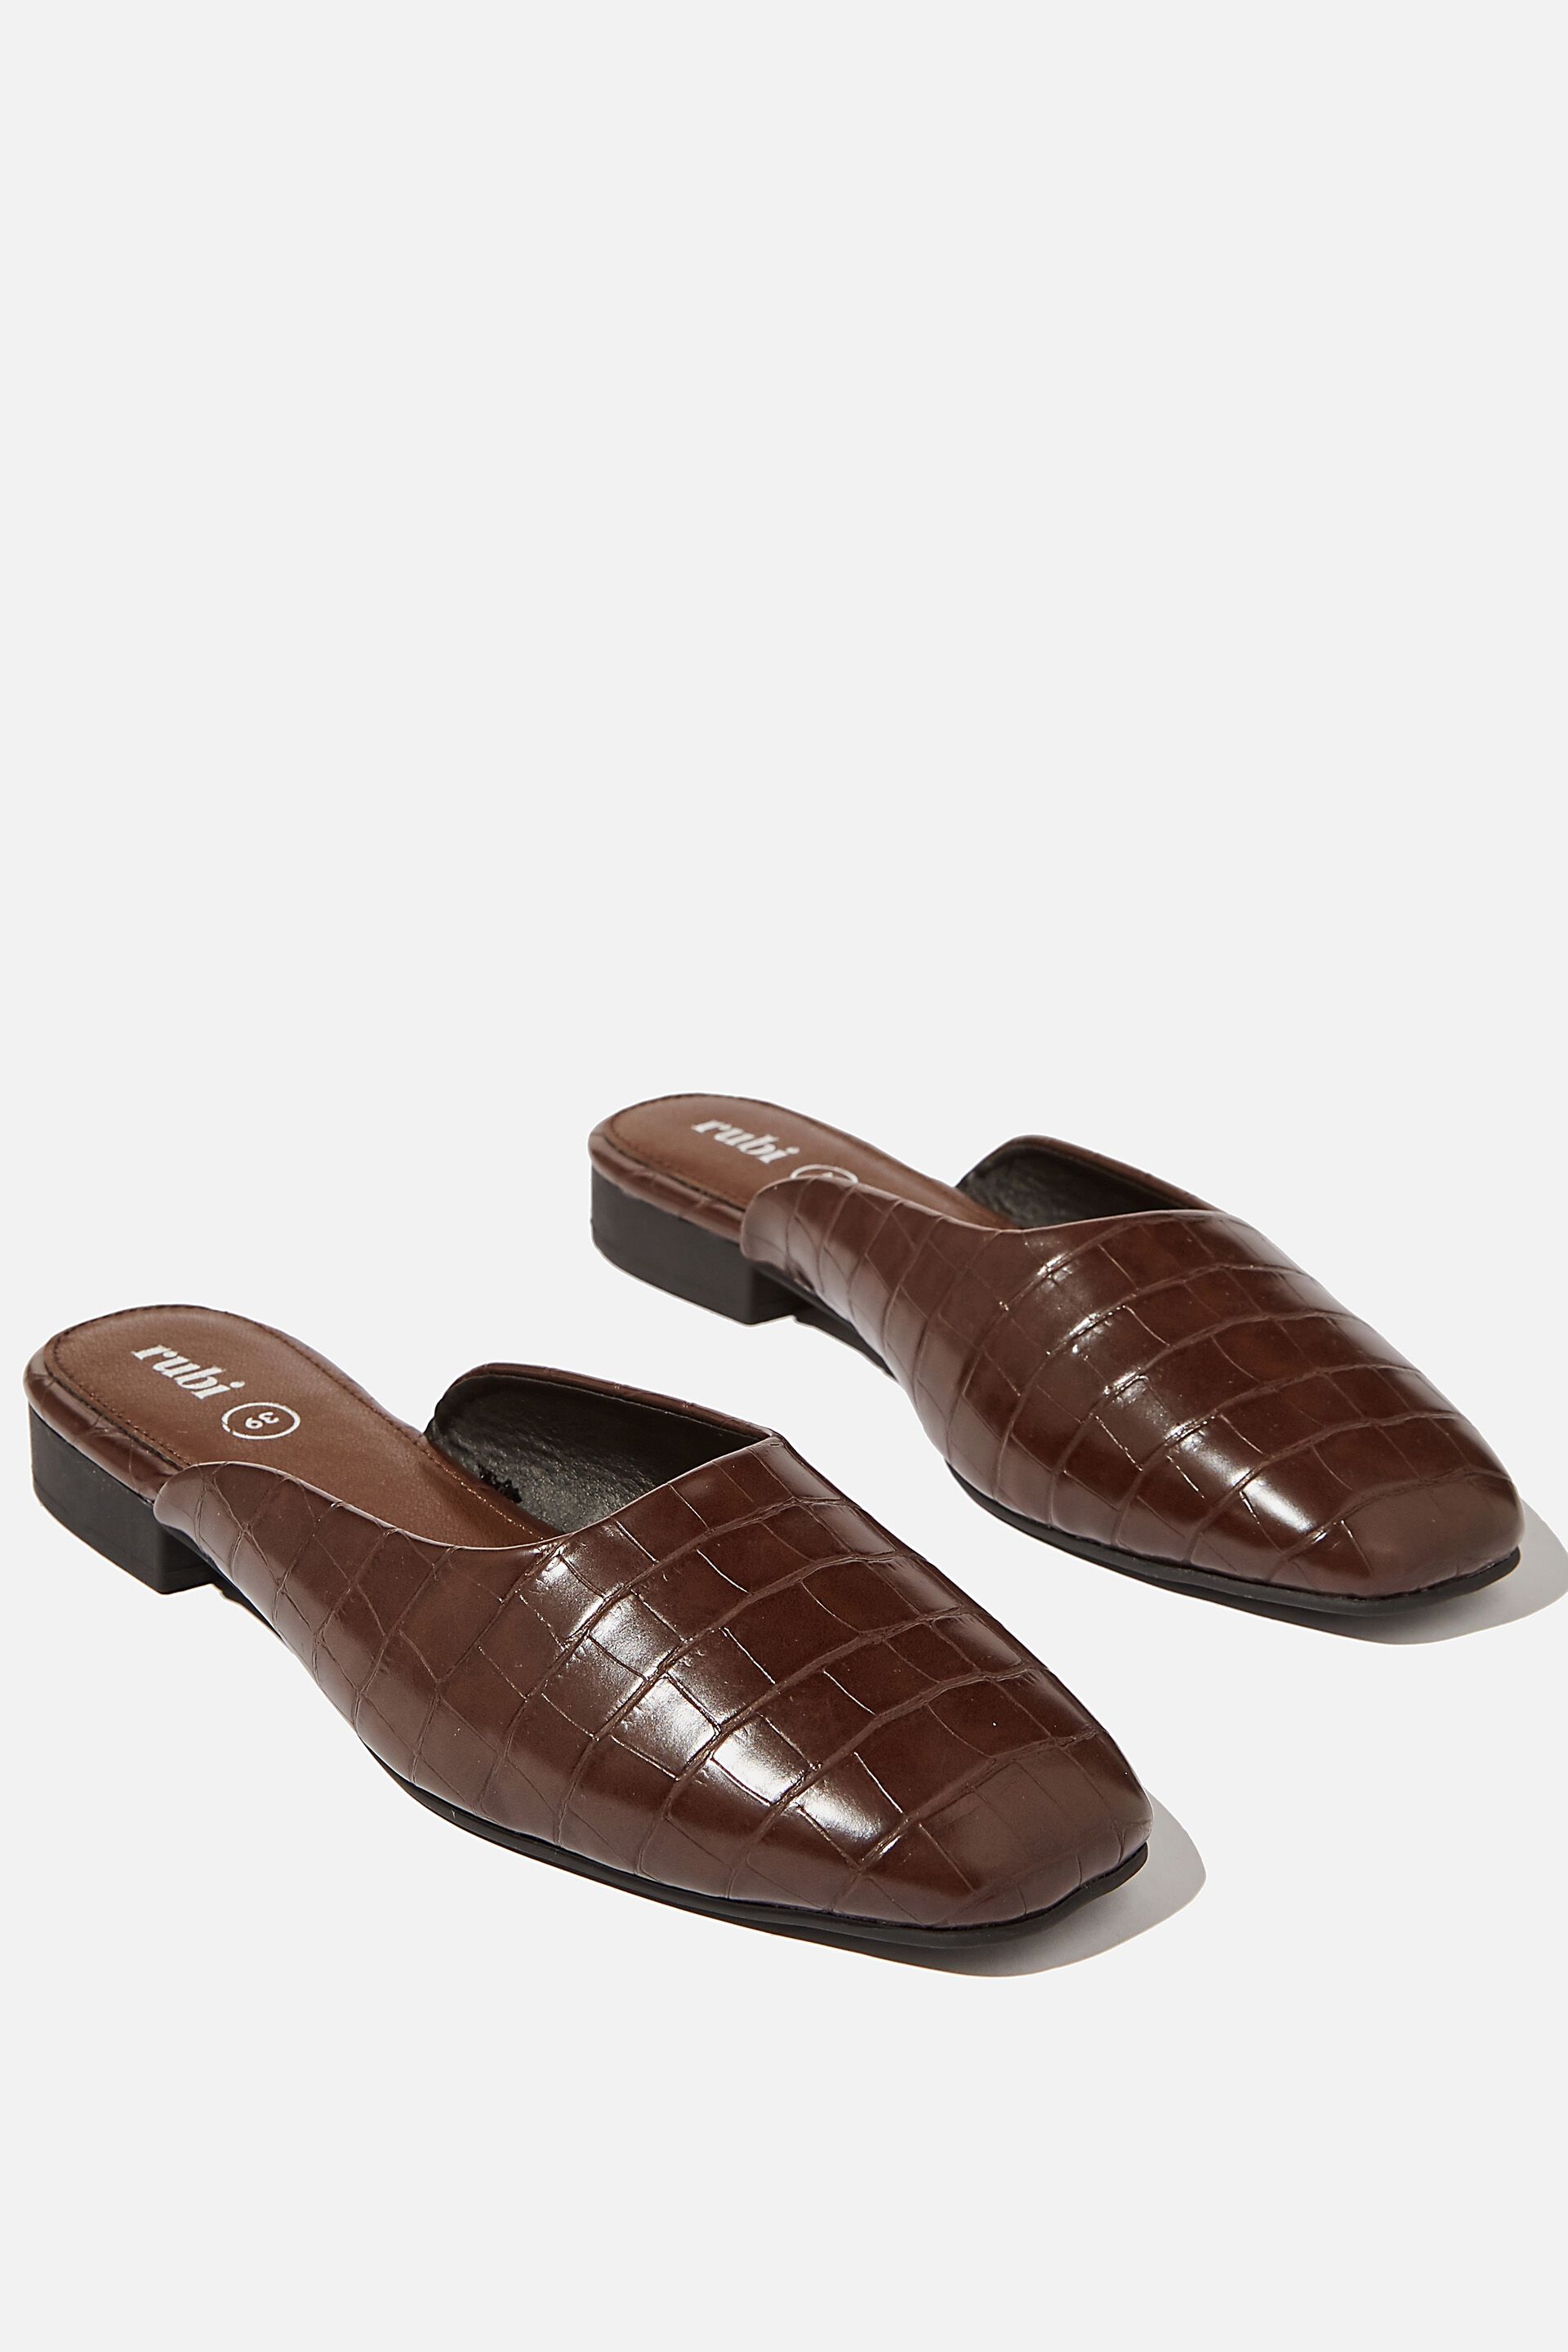 leather mules nz